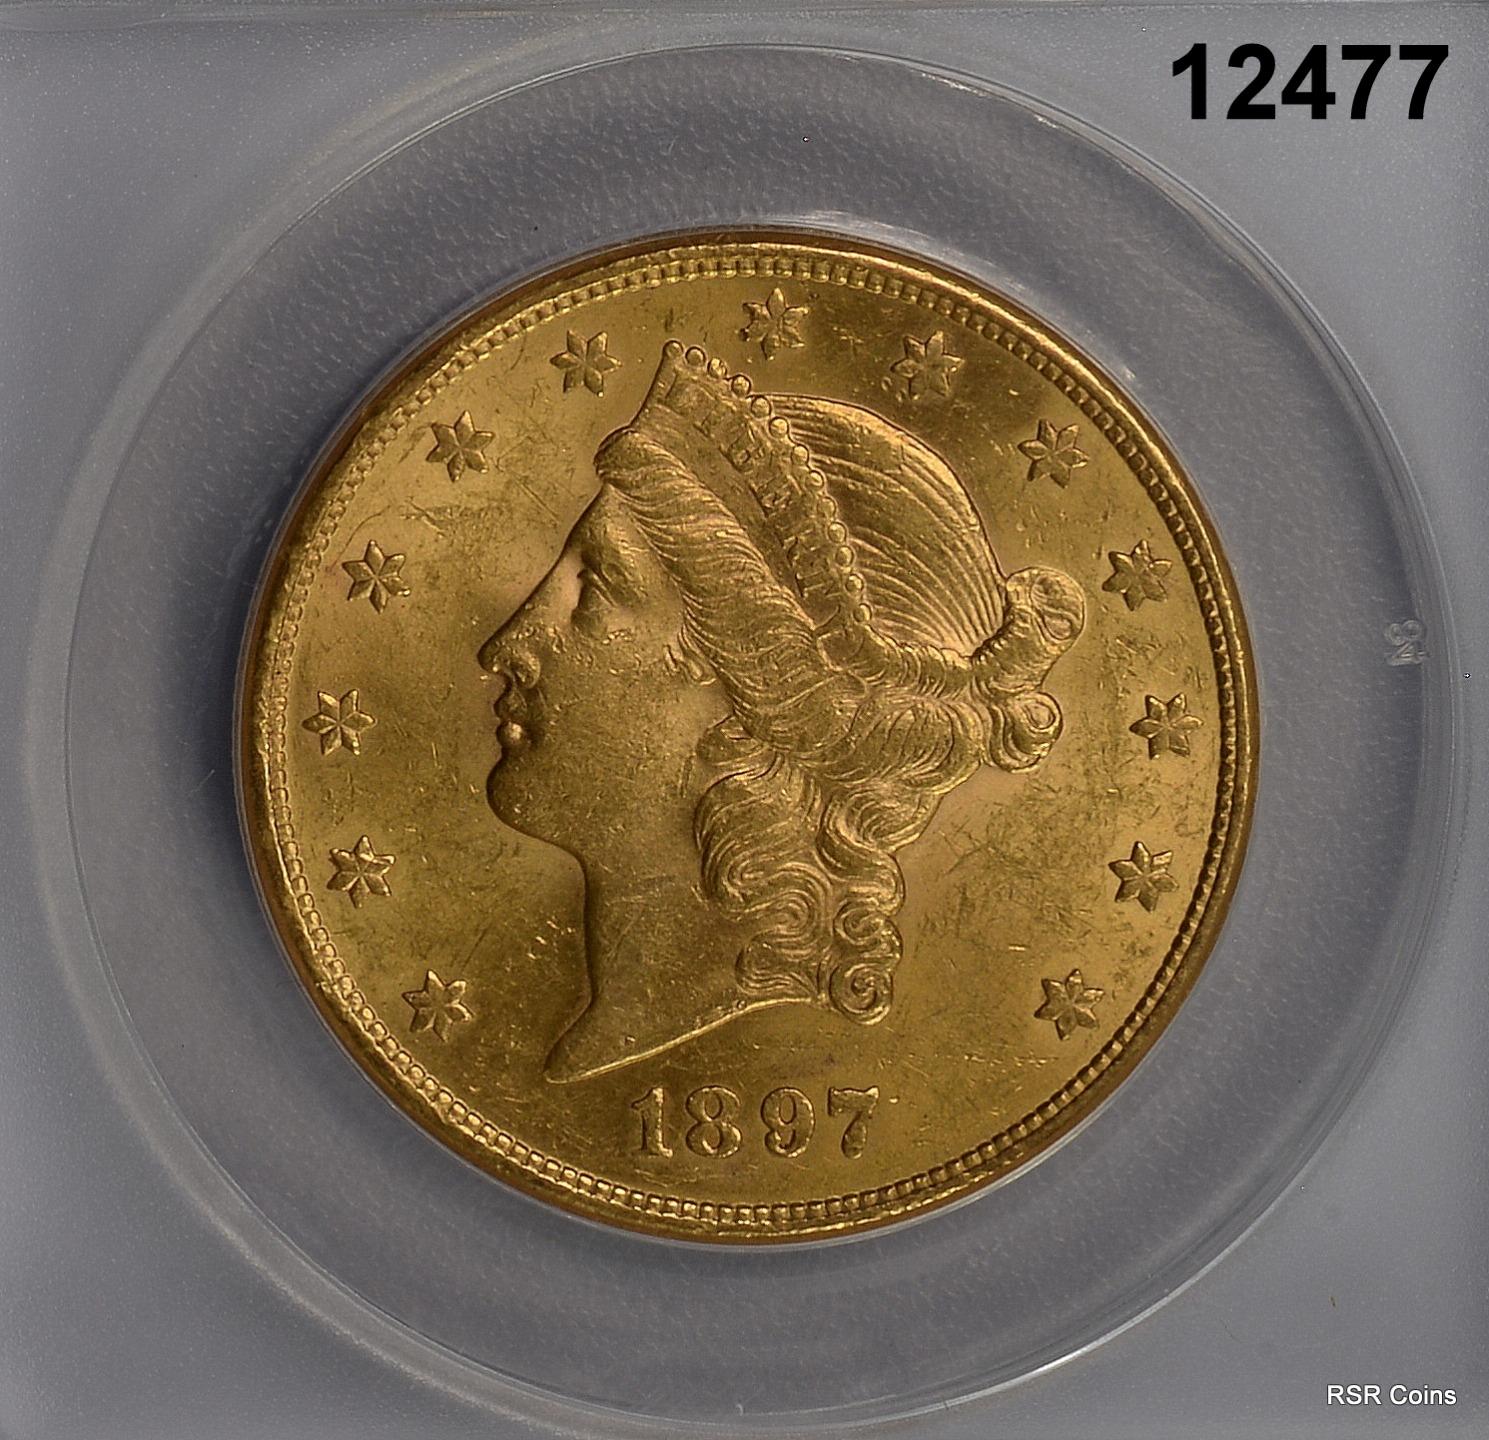 1897 S $20 GOLD LIBERTY DOUBLE EAGLE ANACS CERTIFIED AU58 GREAT LUSTER!! #12477